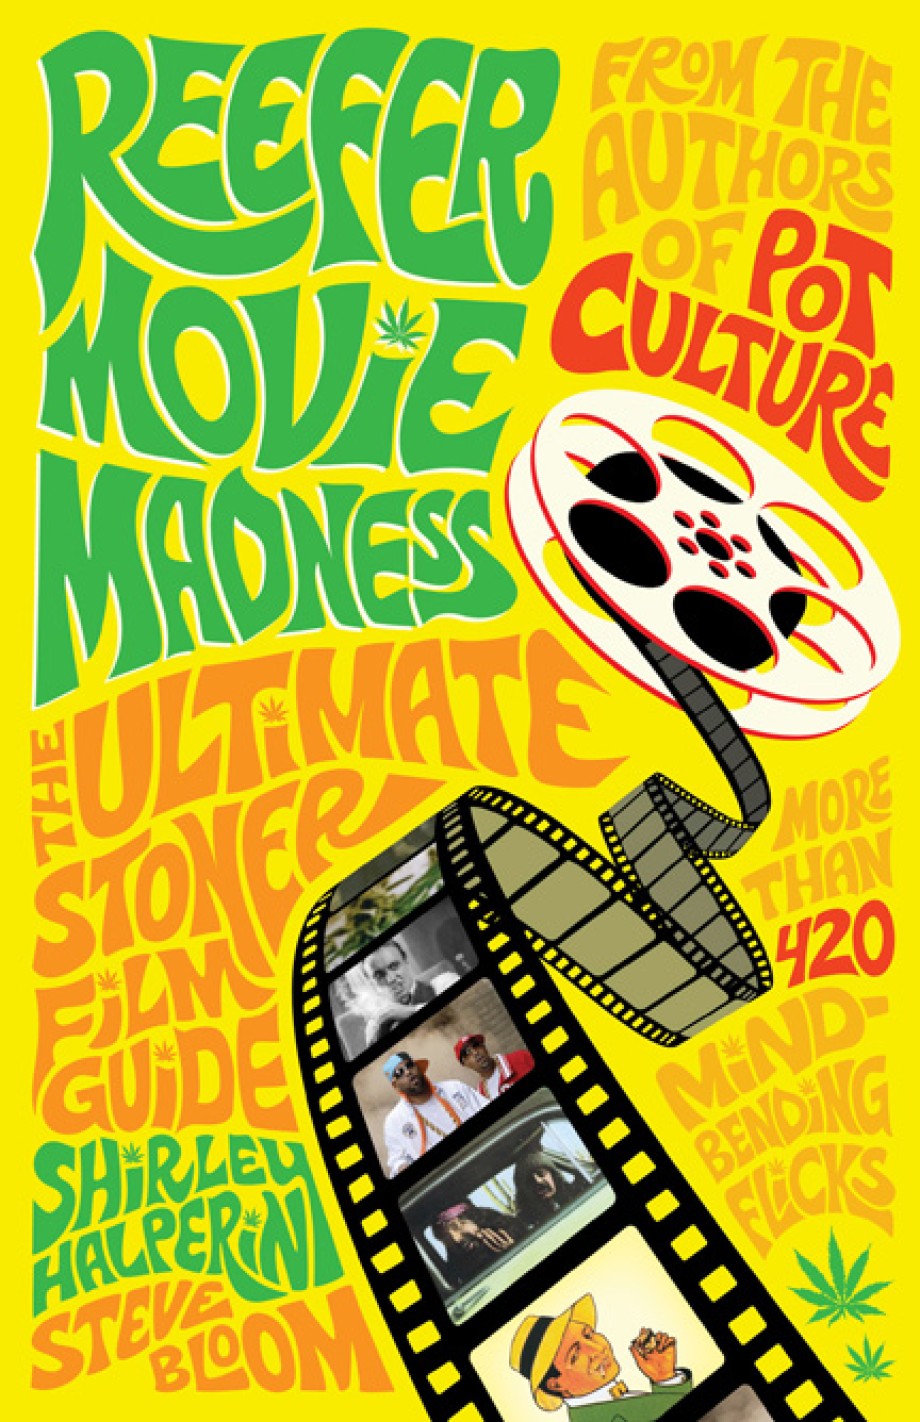 Reefer Movie Madness The Ultimate Stoner Film Guide